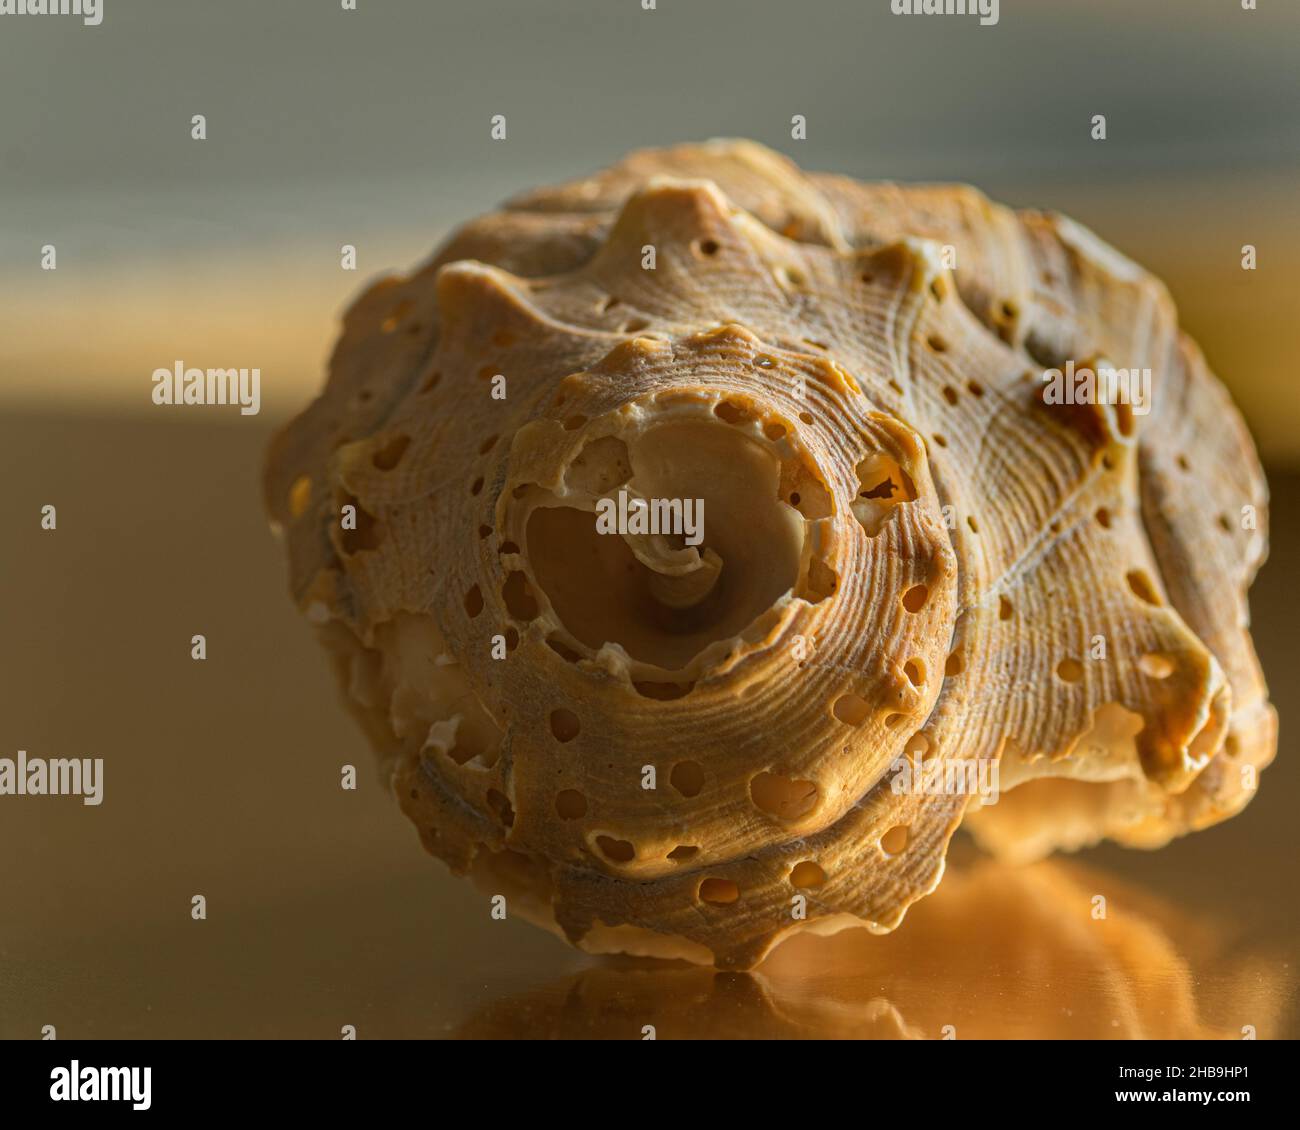 Close-up of weathered whelk seashell found in Atlantic Beach, NC, USA Stock Photo